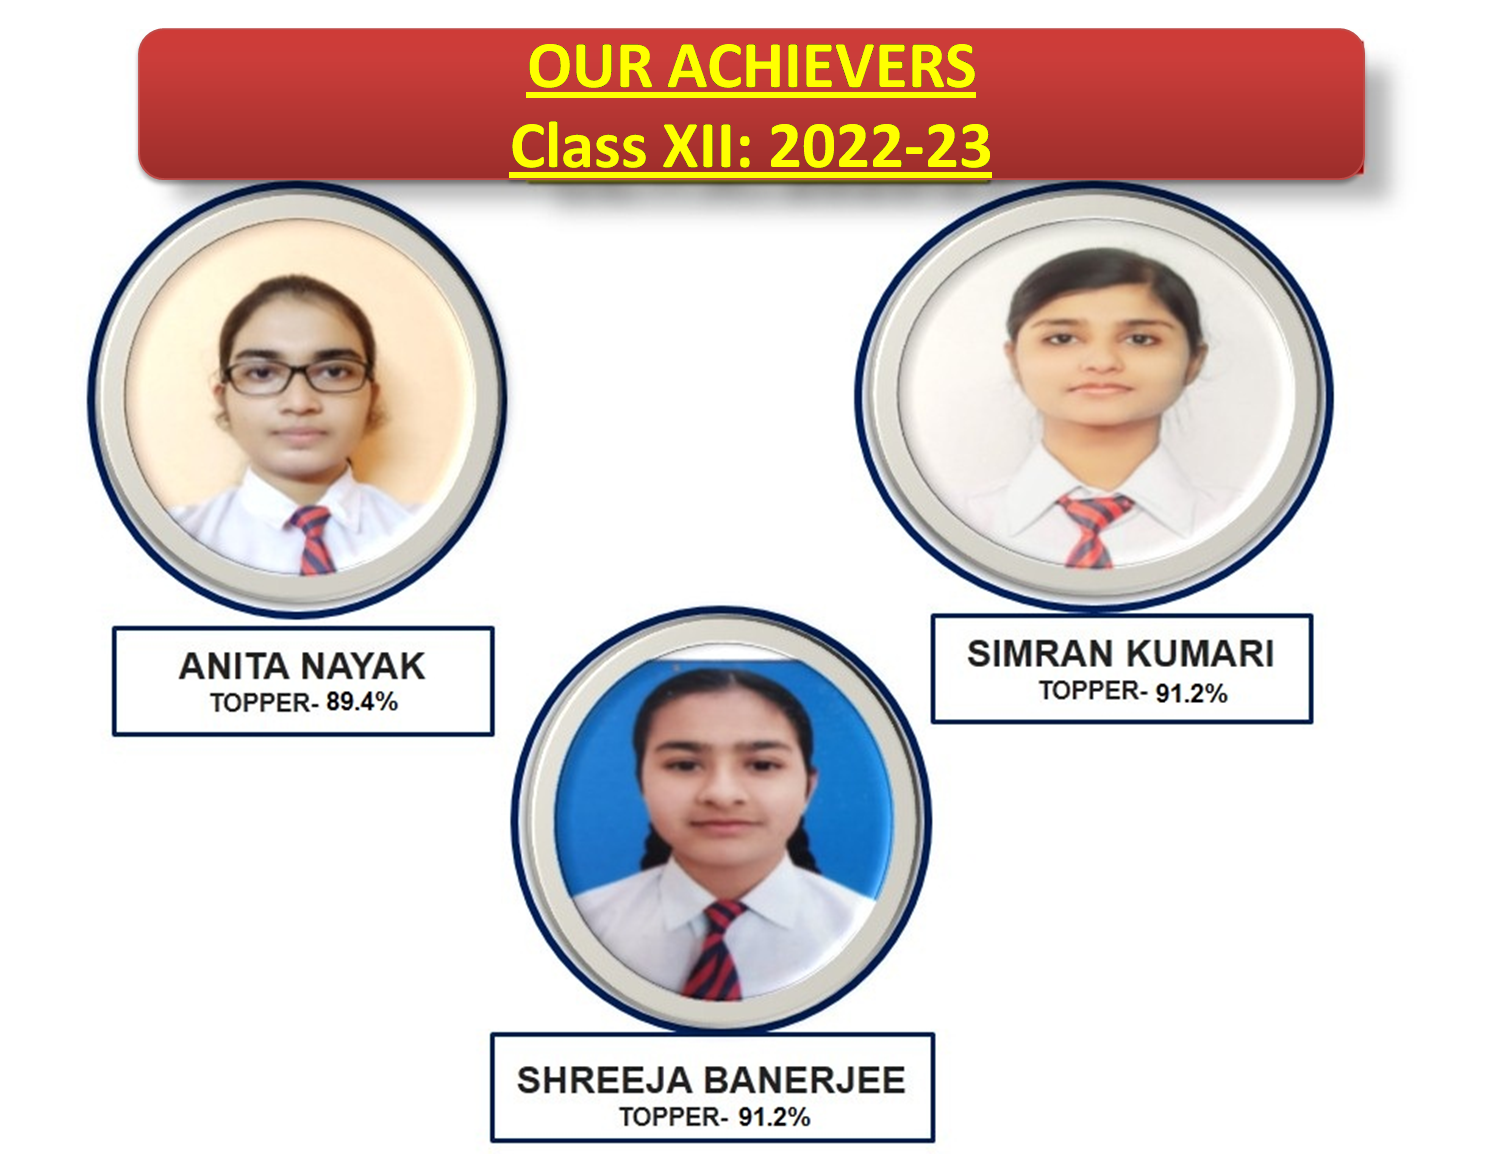 Our Achievers (2022-2023): Class XII